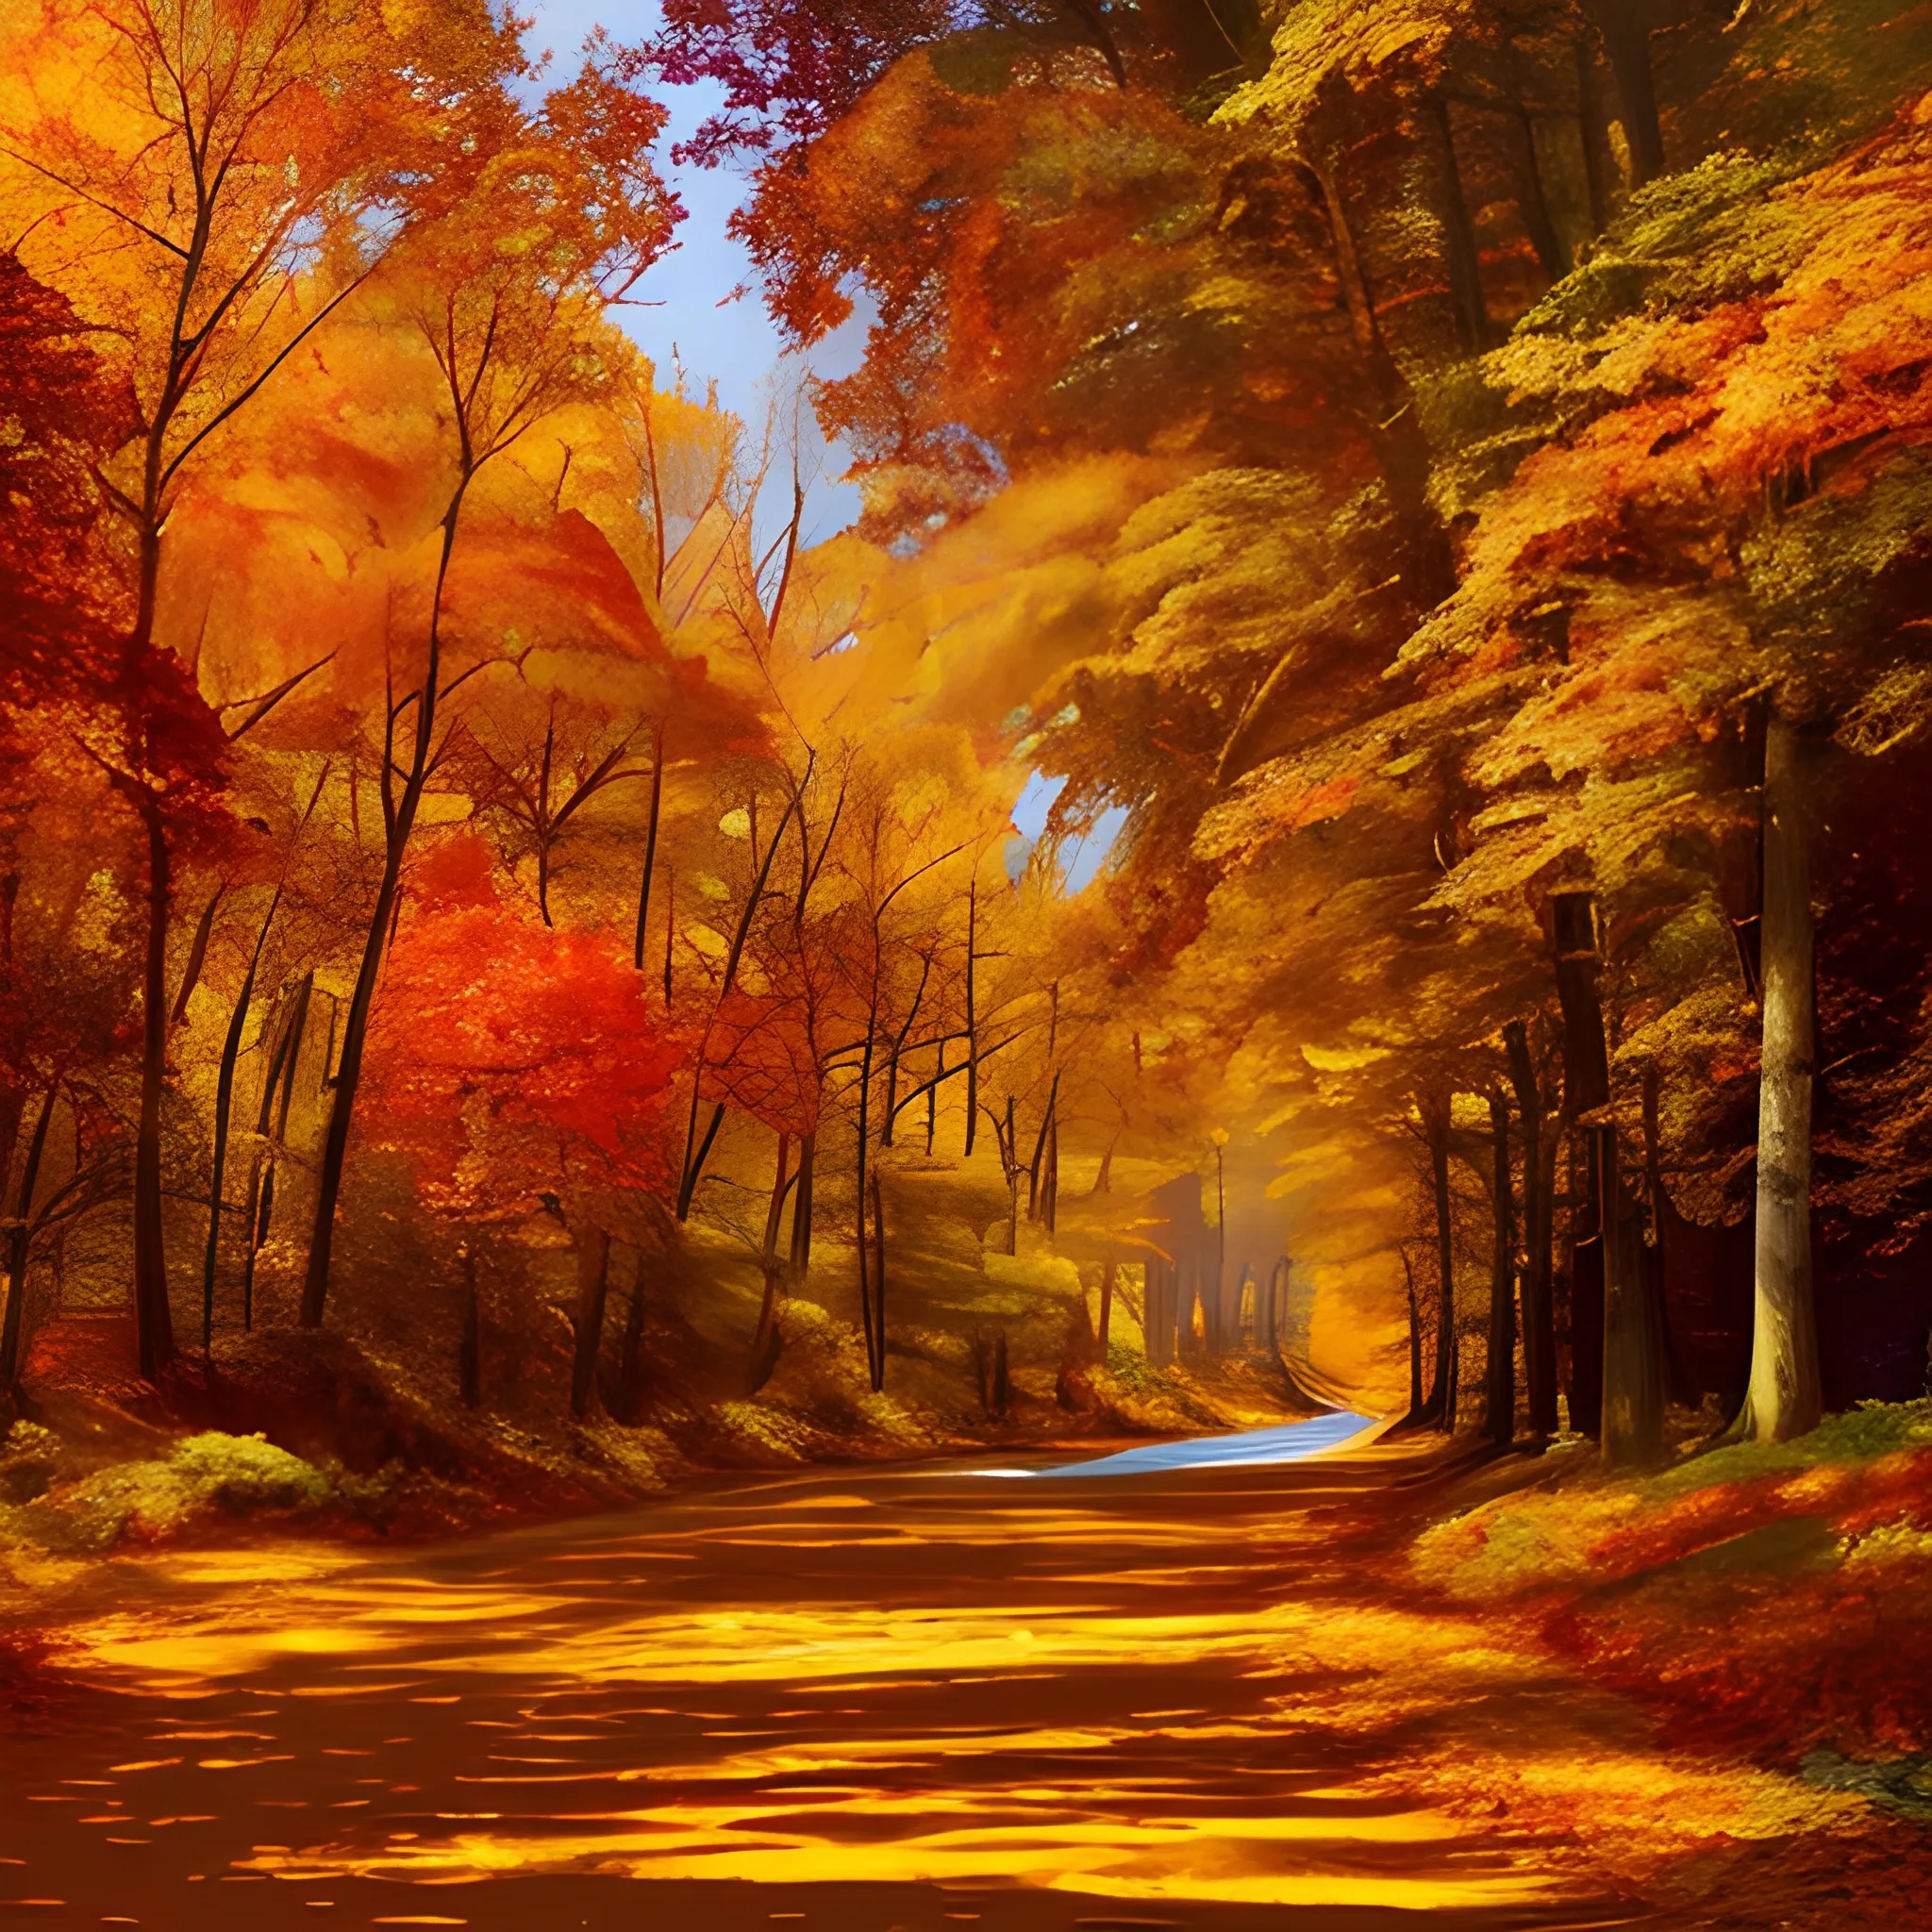 "Vibrant and enchanting autumn landscapes, capturing the true beauty of fall, rich golden hues, fiery red and orange leaves, crisp cool air, scenic countryside or forest trails, sunlight filtering through the foliage, a sense of nostalgia and warmth, a picturesque scene that celebrates the wonders of the season."